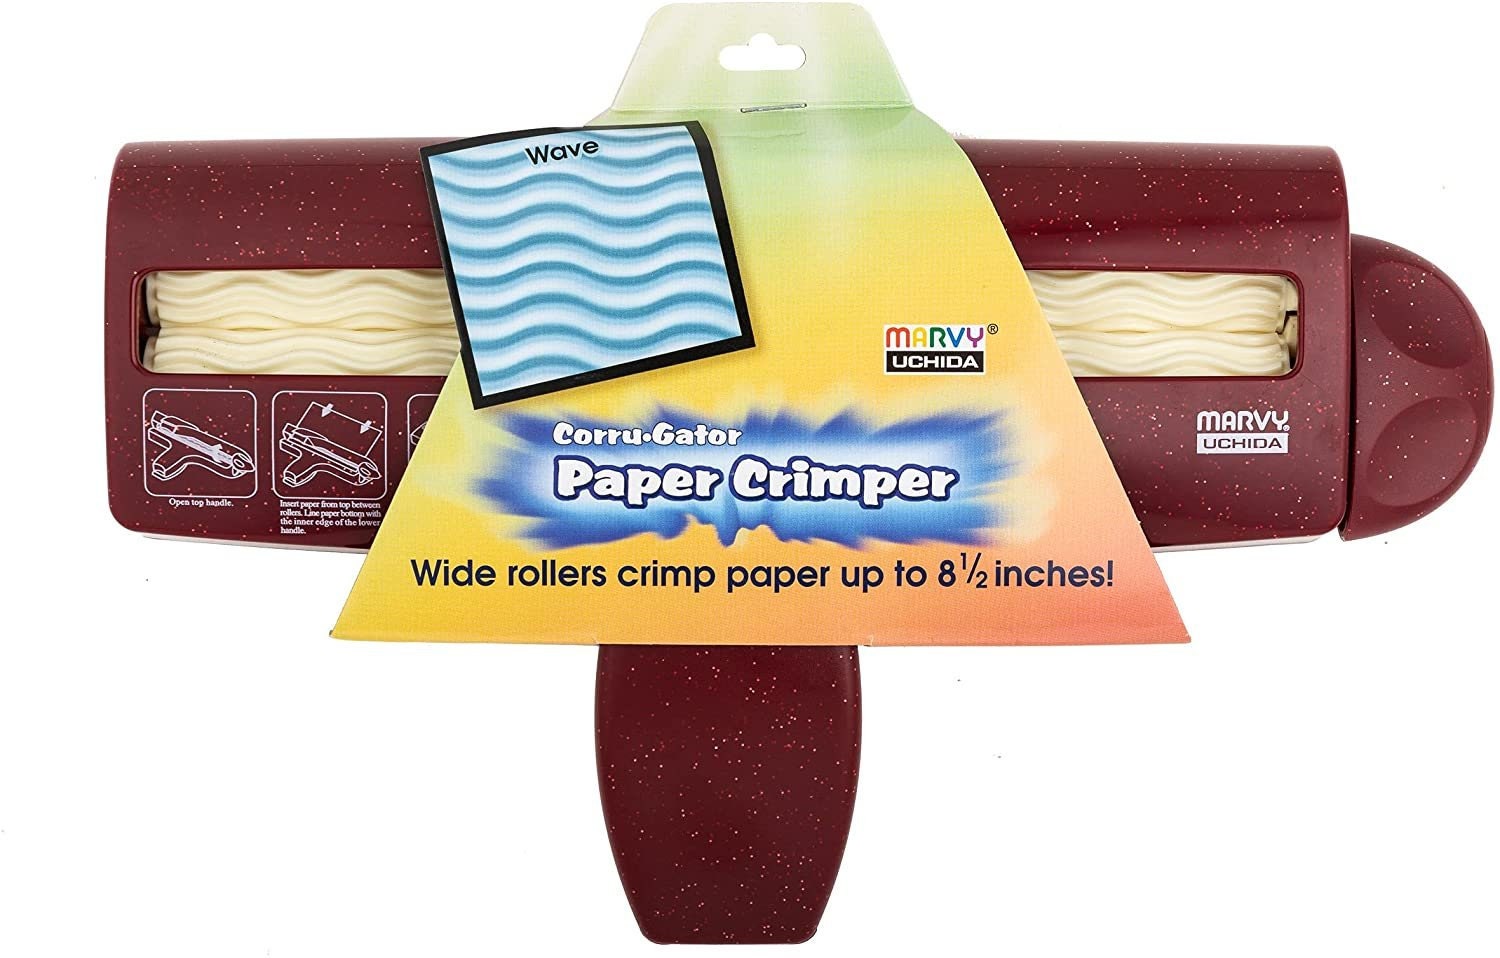 Replying to @nicoleboheler Paper Crimper from  #chipbags #southt, Handmade Bag